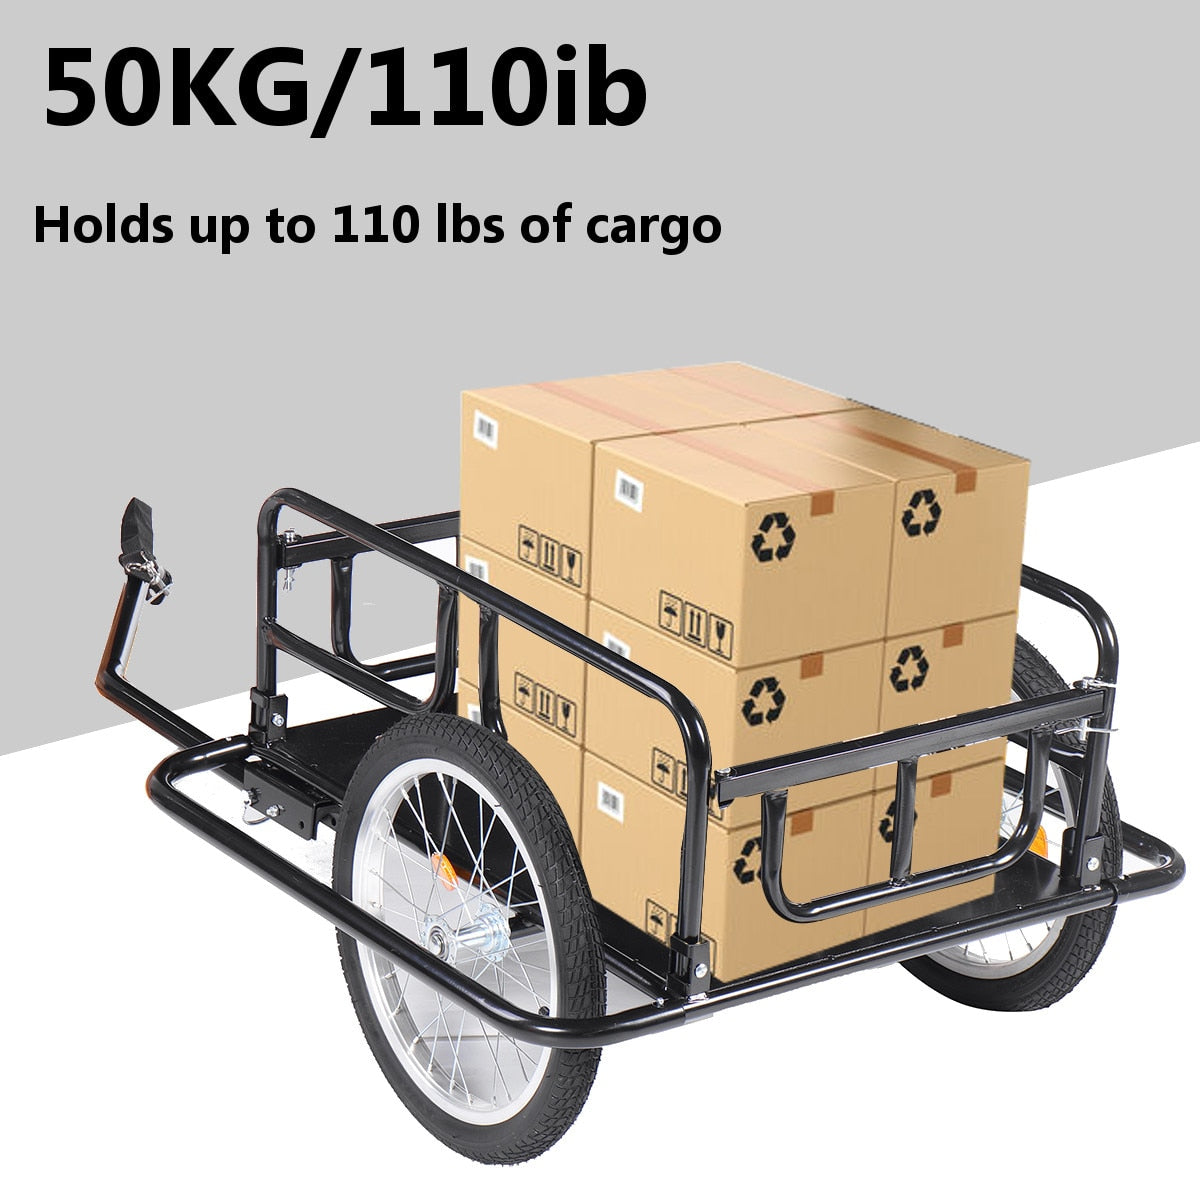 Fast-shipping Foldable Multifunctional Bicycle Cycle Bike Cargo Trailer for Camping Tent Luggage Carry Transport Load 110lbs - lebenoutdoors